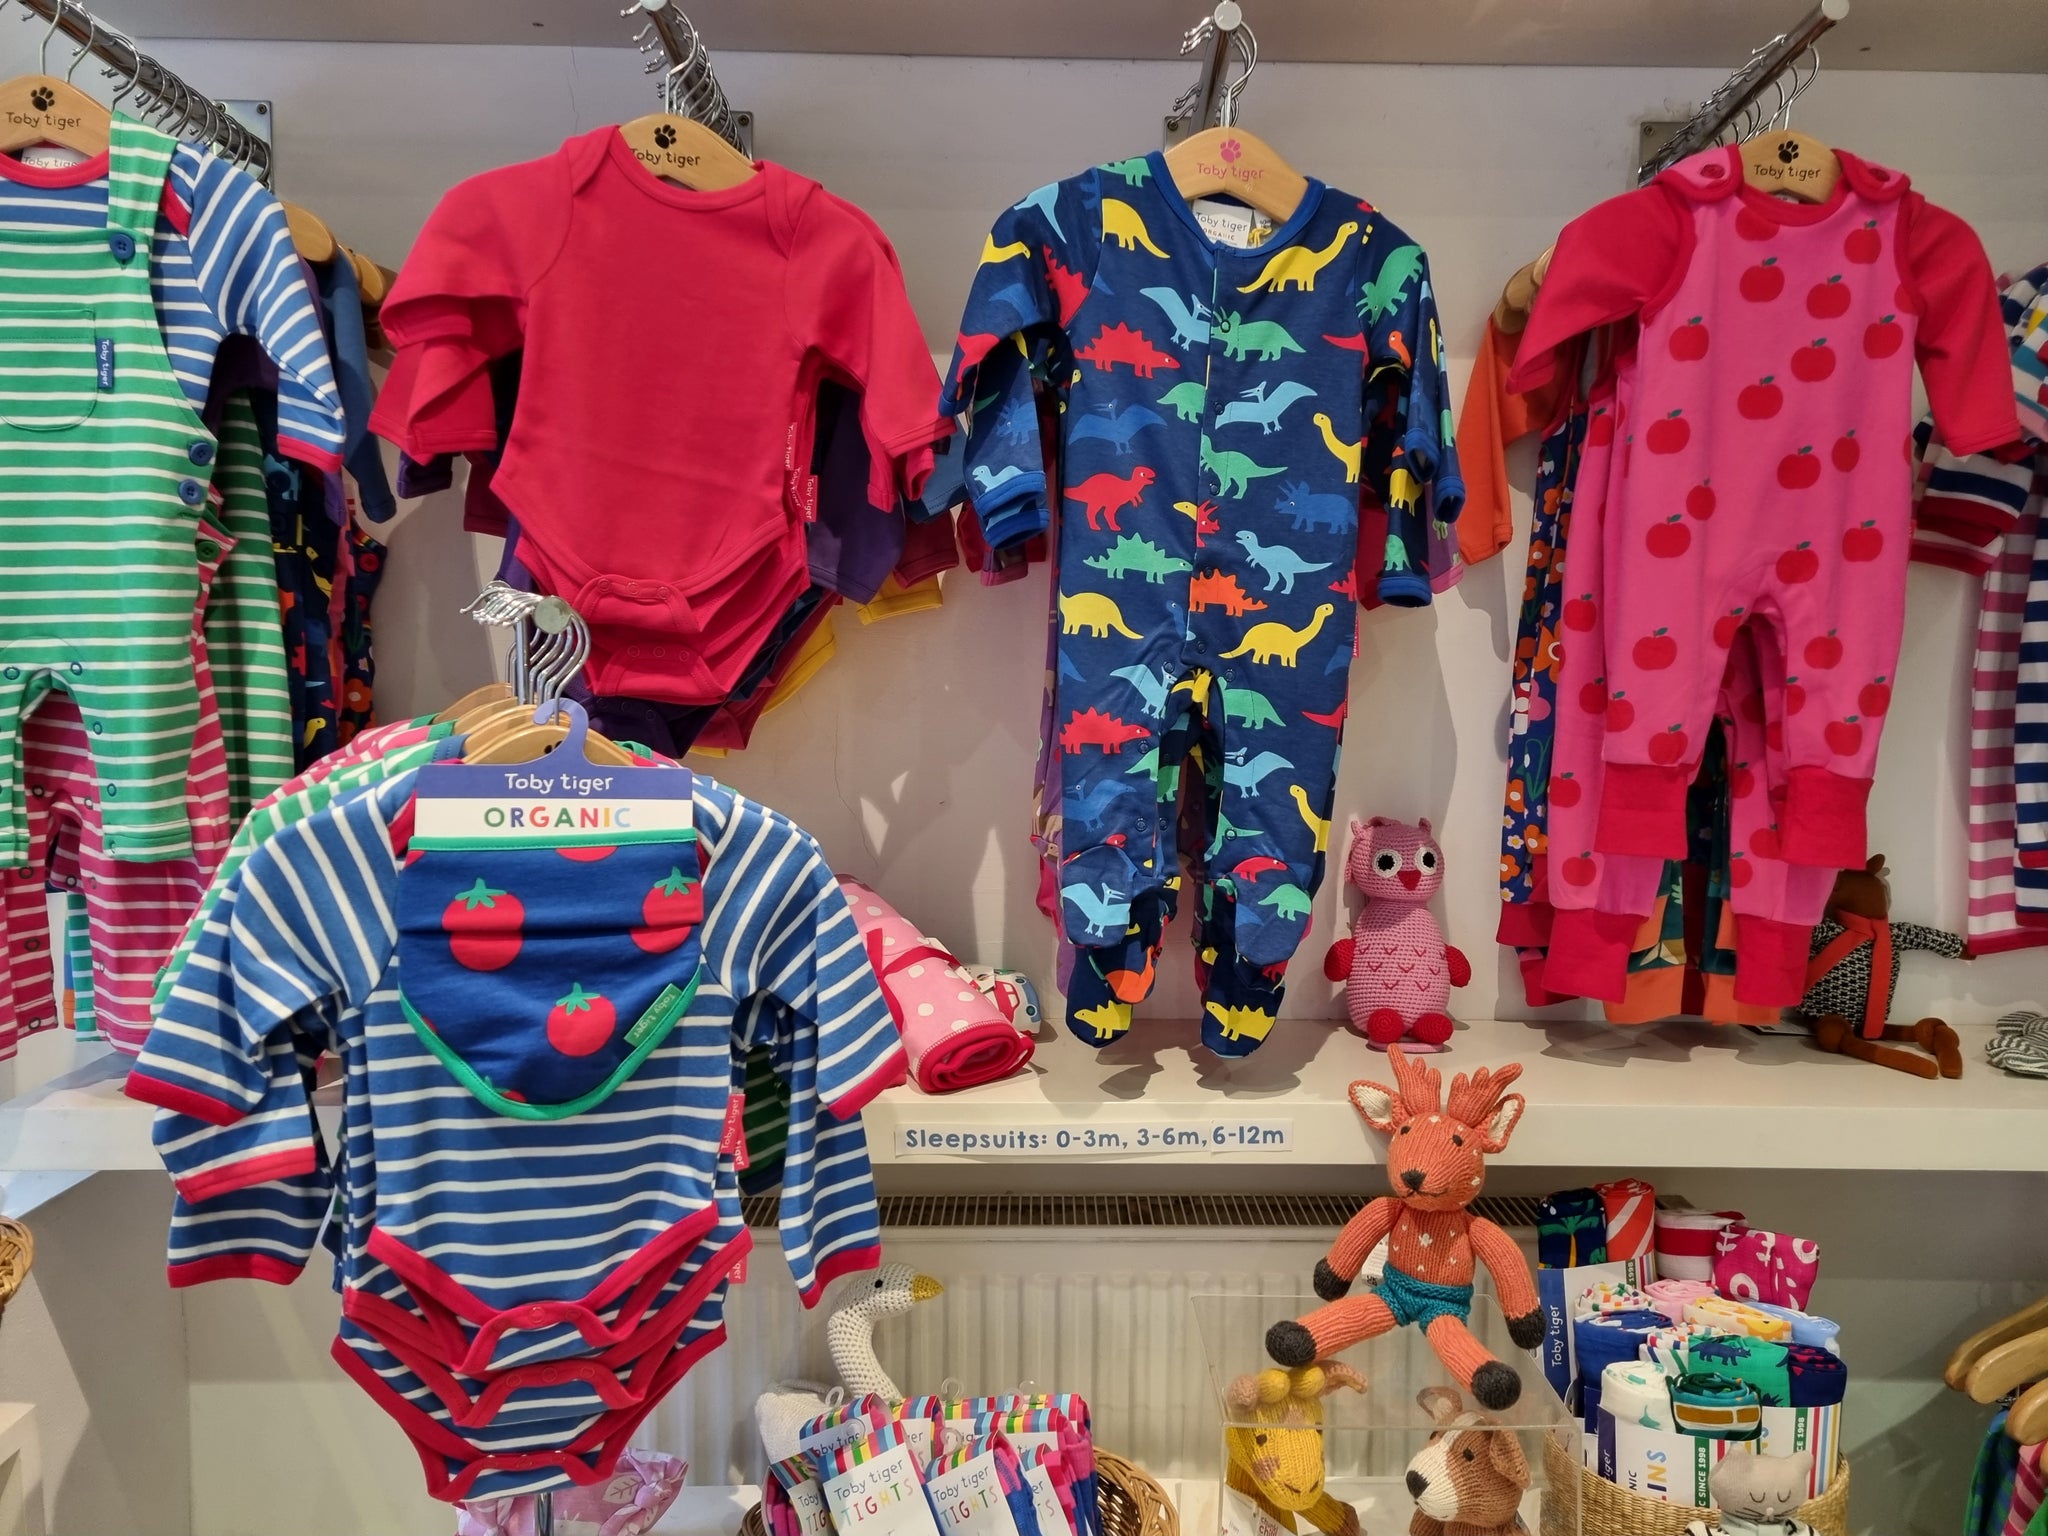 Baby sleepsuits in Toby Tiger Brighton